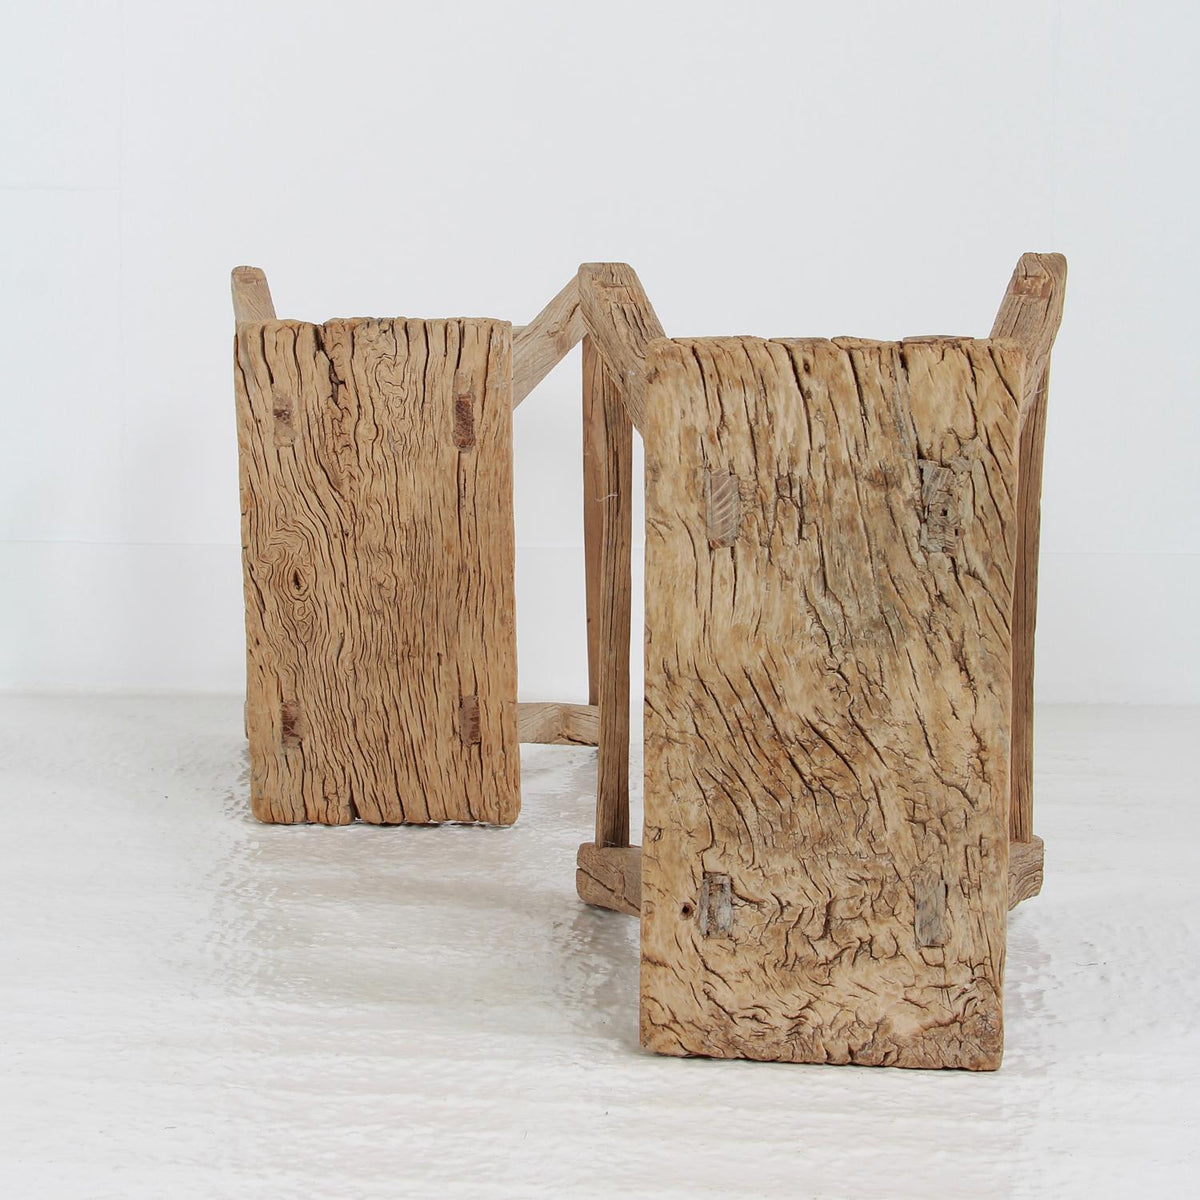 NEAR PAIR OF RUSTIC WABI-SABI CHINESE WORKERS STOOLS OR TABLES